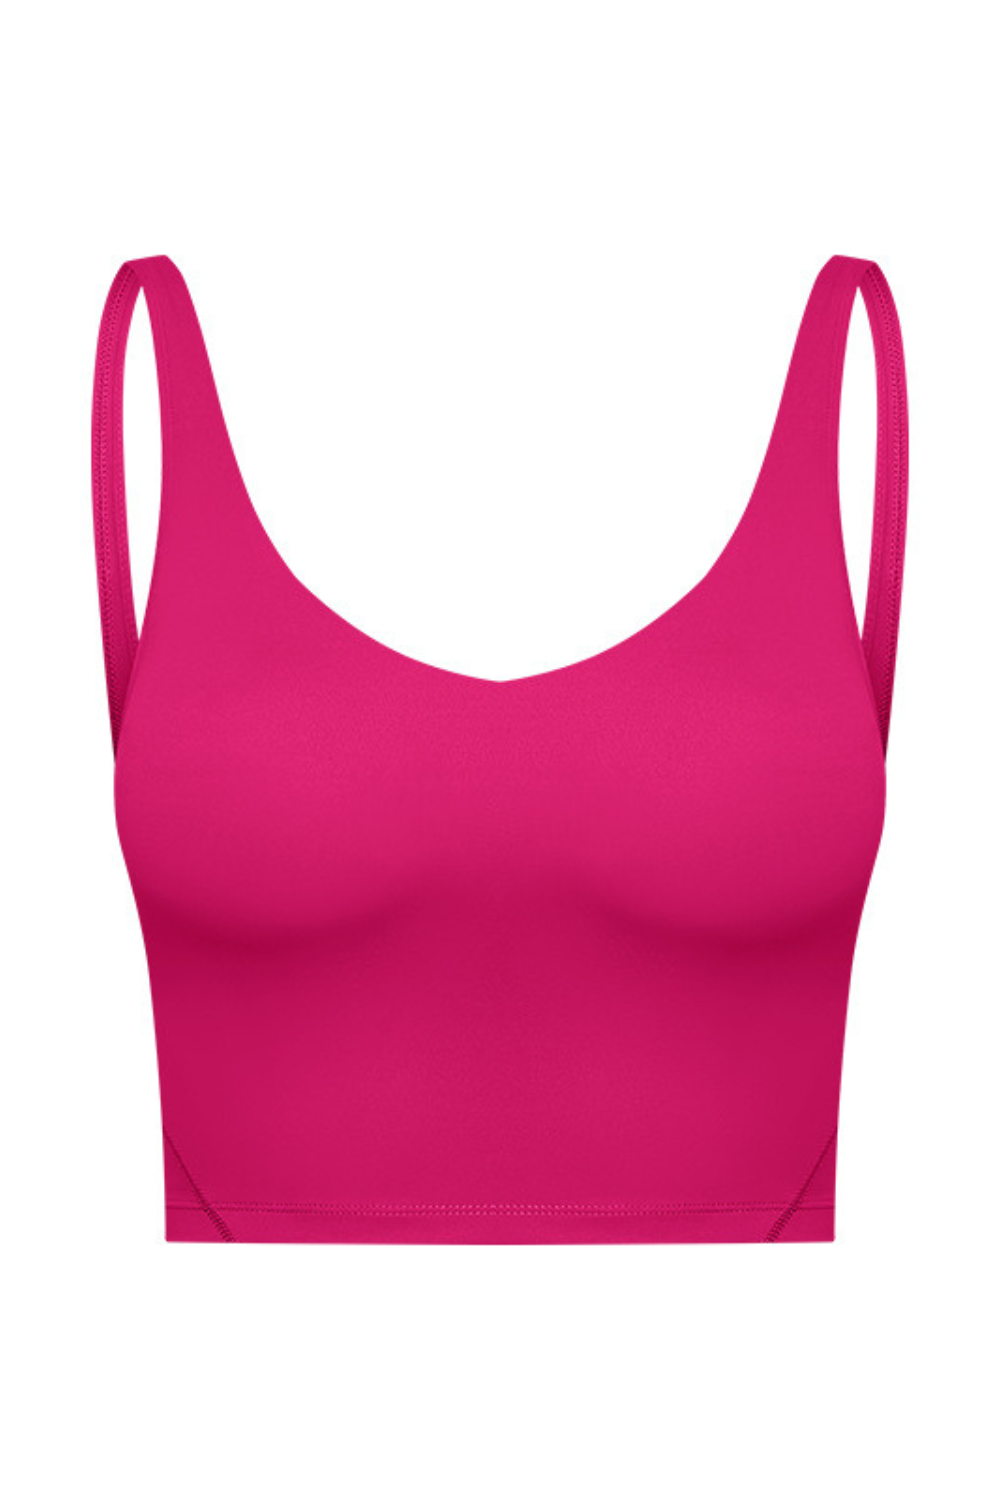 Navalora Fit Arabelle Longline Bra with Removable Pads Align Tank in Magenta Pink 